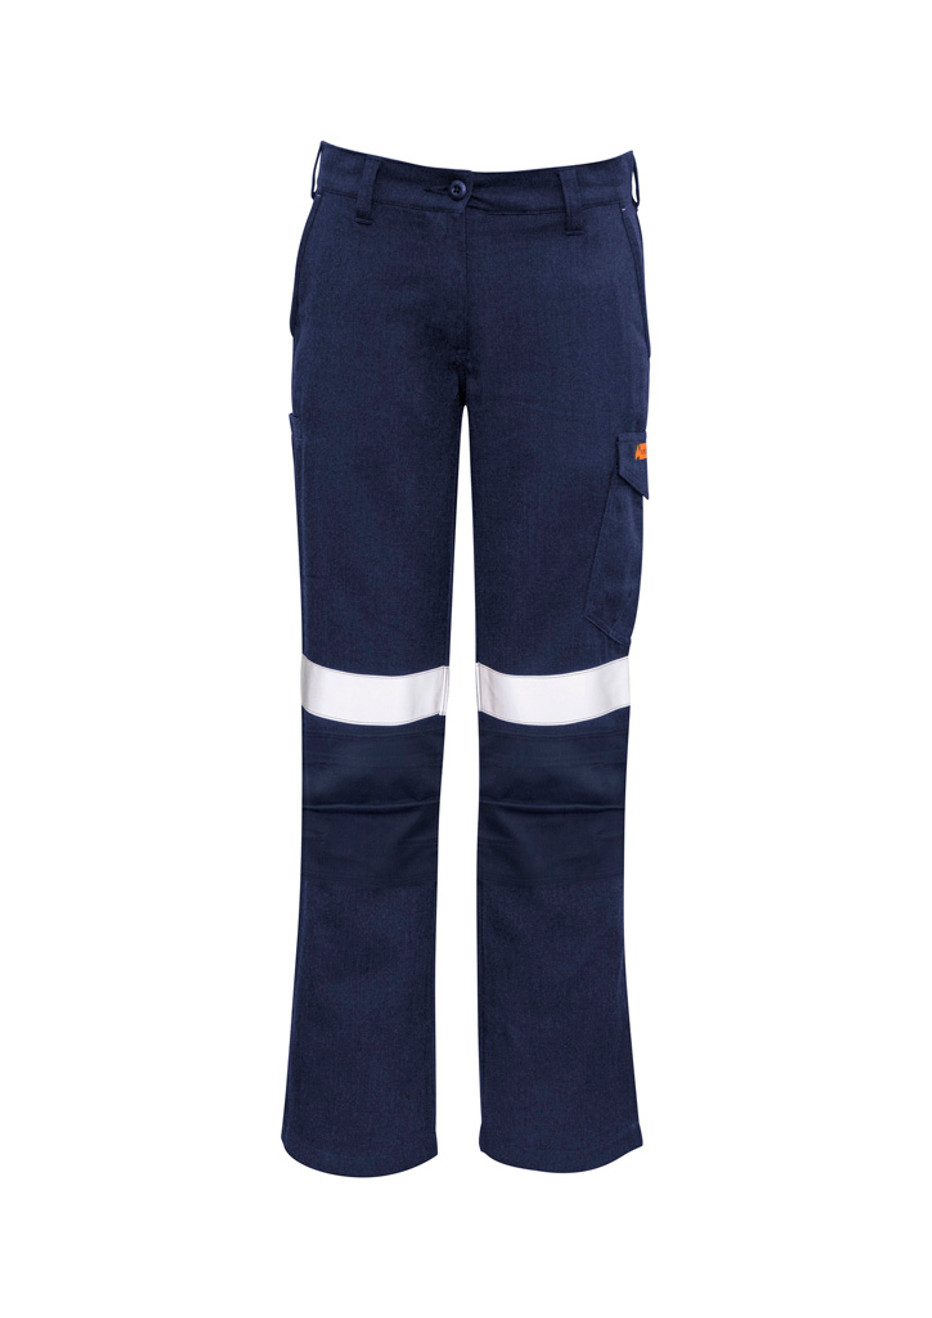 Syzmik ZP522 Womens Taped Cargo Pant | Available Colour: Navy